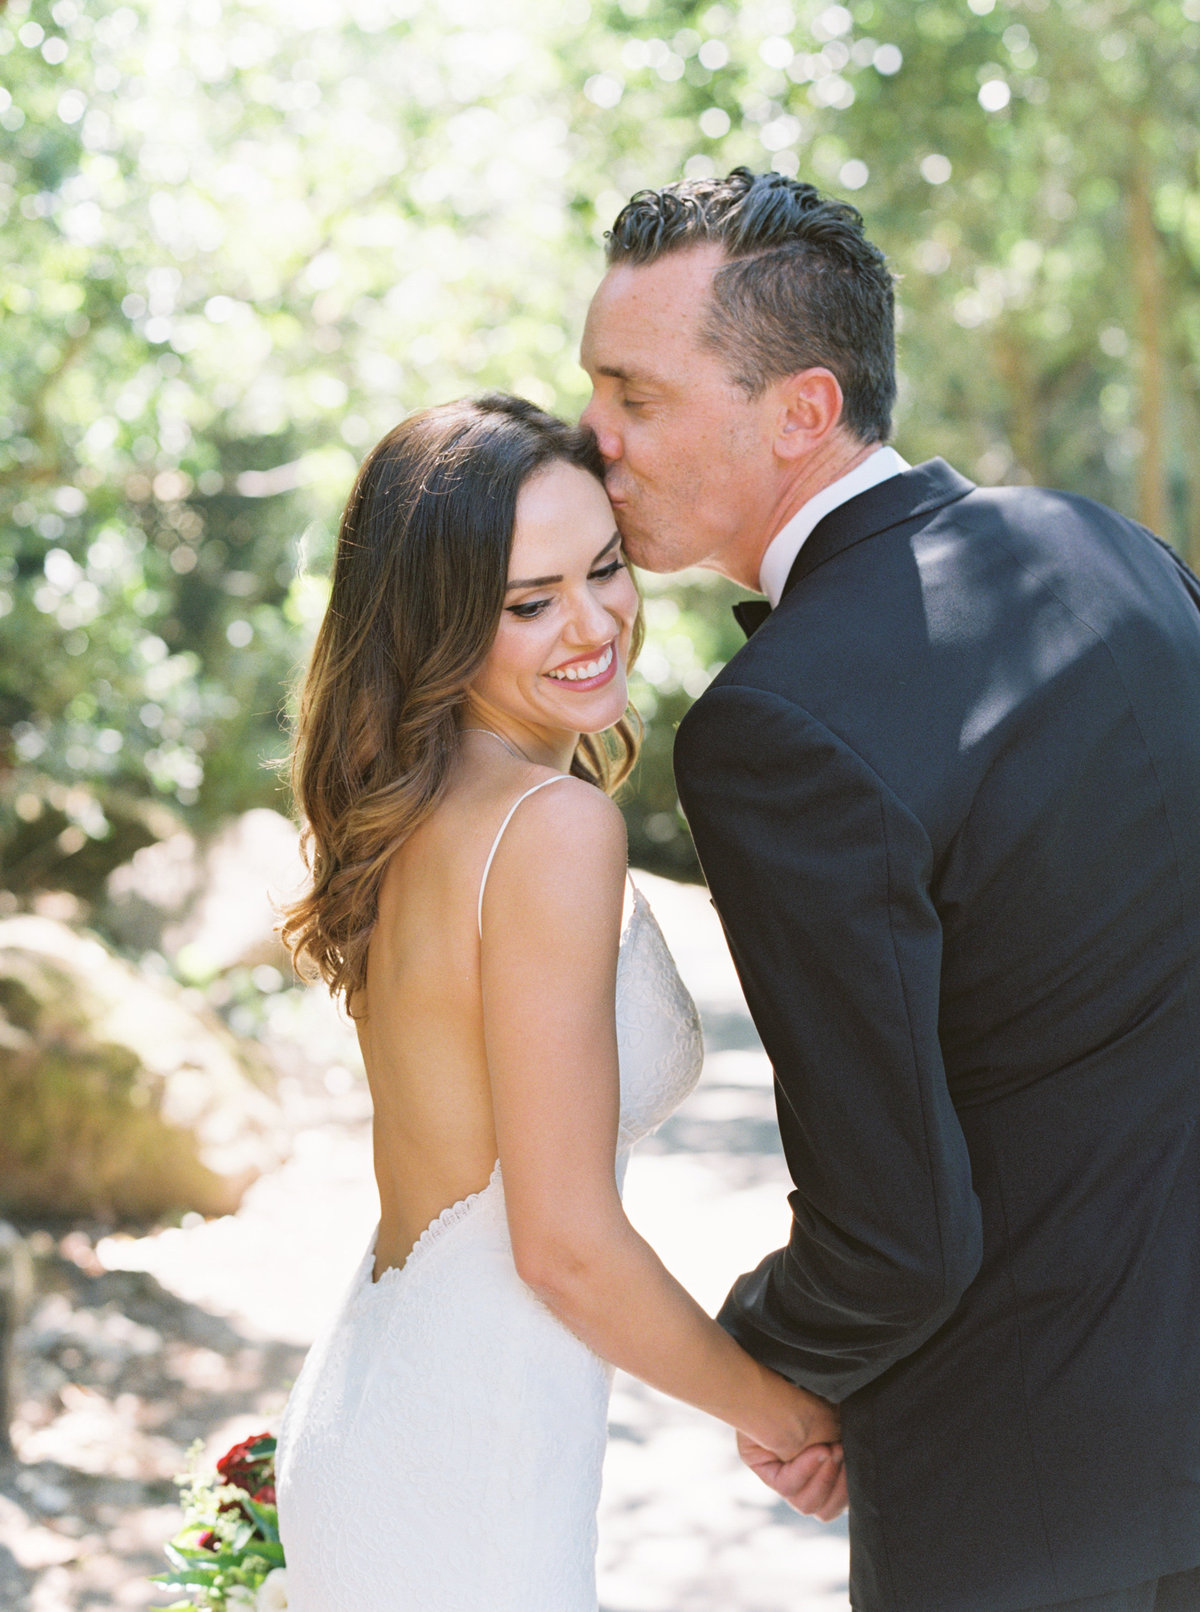 Angie + Stephen Meadowood French Laundry Elopement Wedding - Cassie Valente Photography 0047